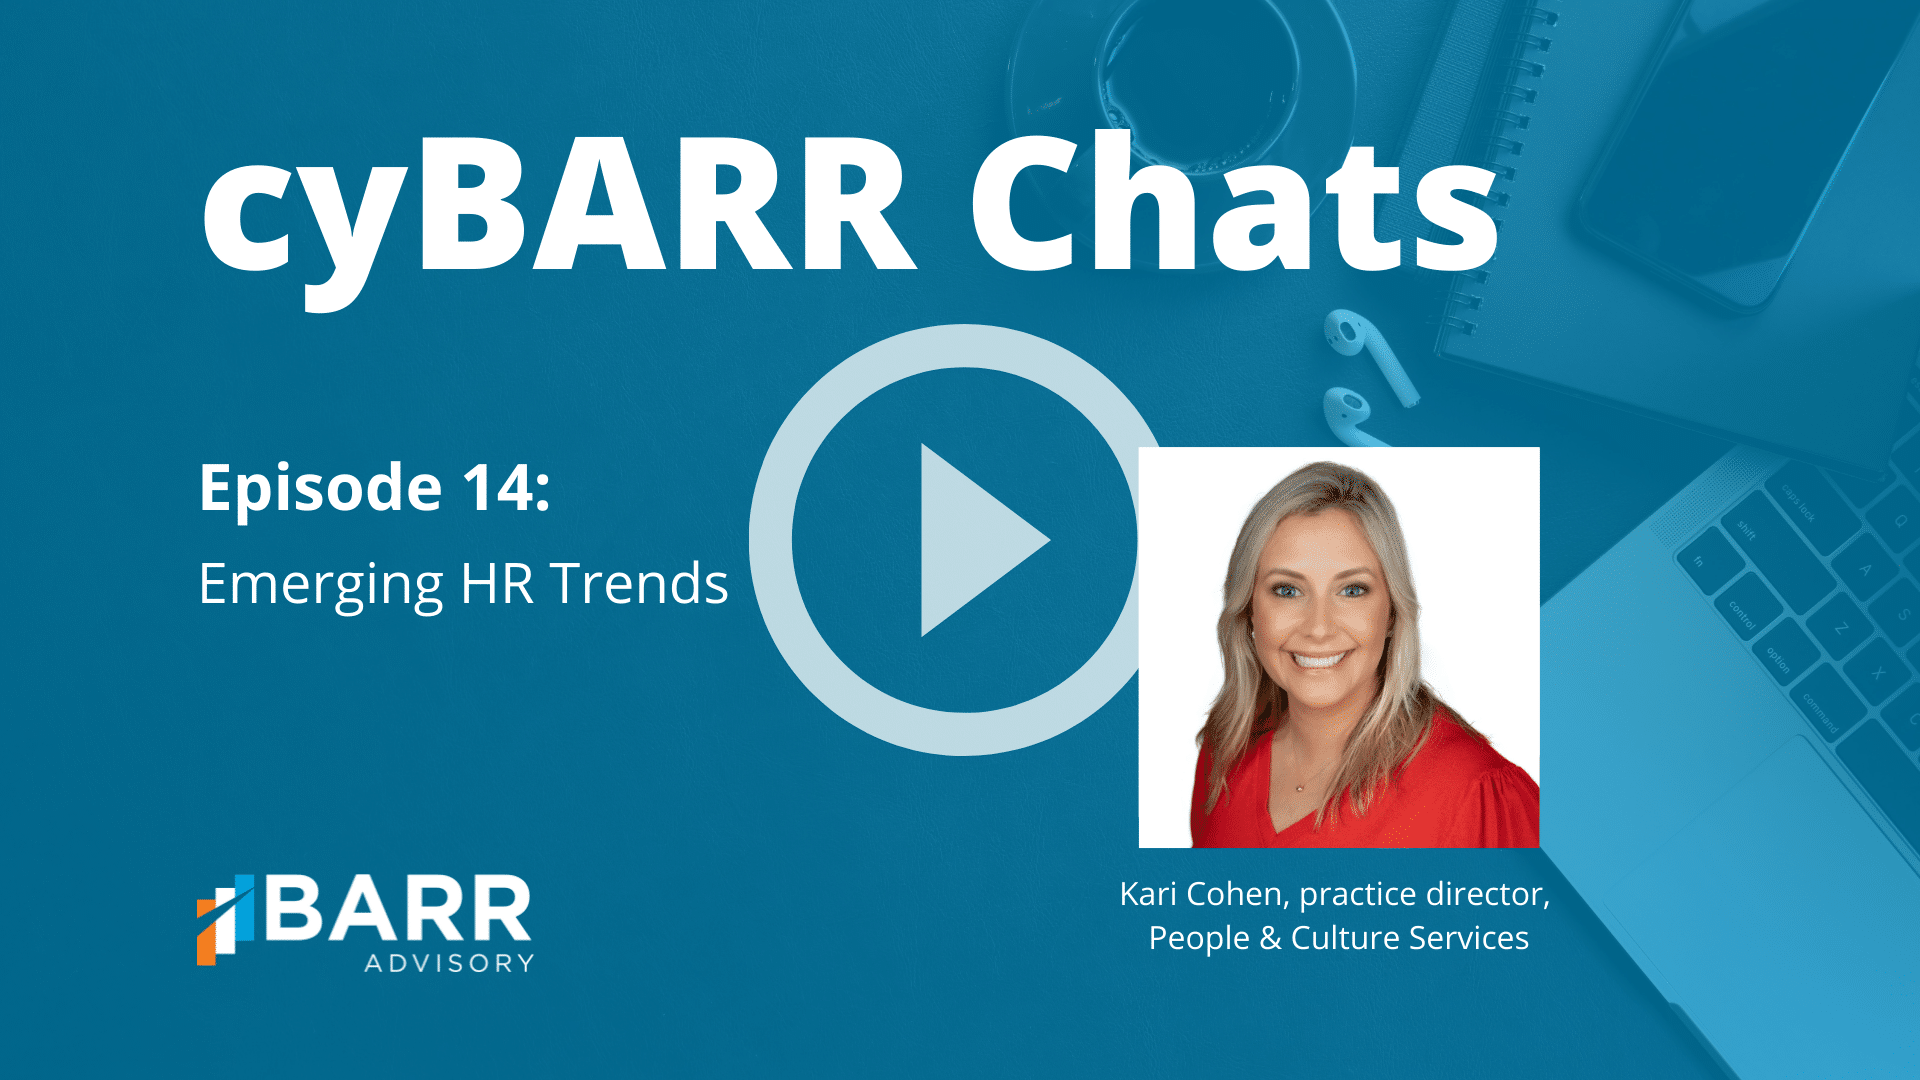 cyBARR Chats Episode 14: Emerging HR Trends